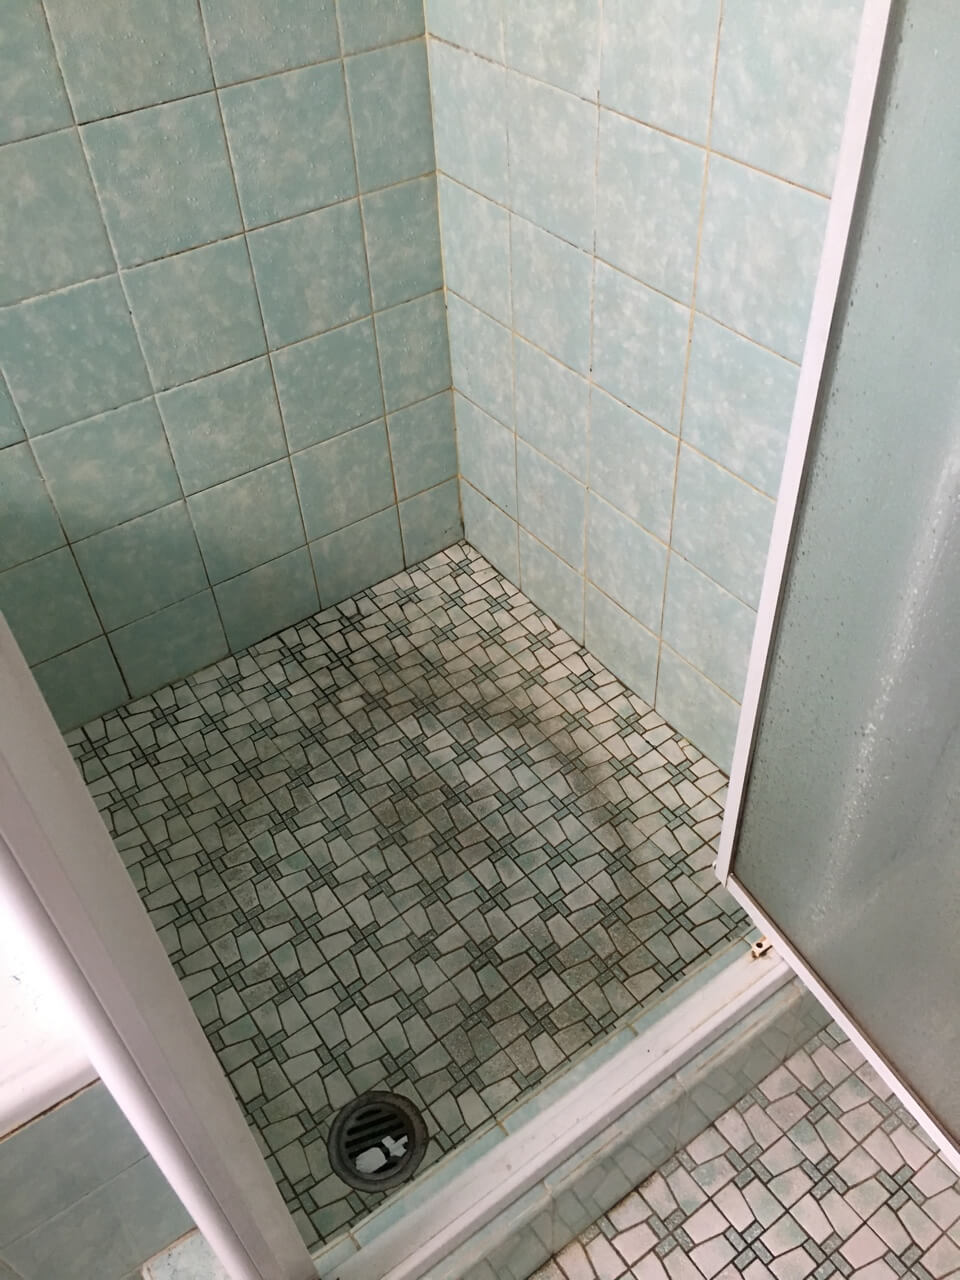 Repair that leaking shower without removing tiles - RhinoSeal